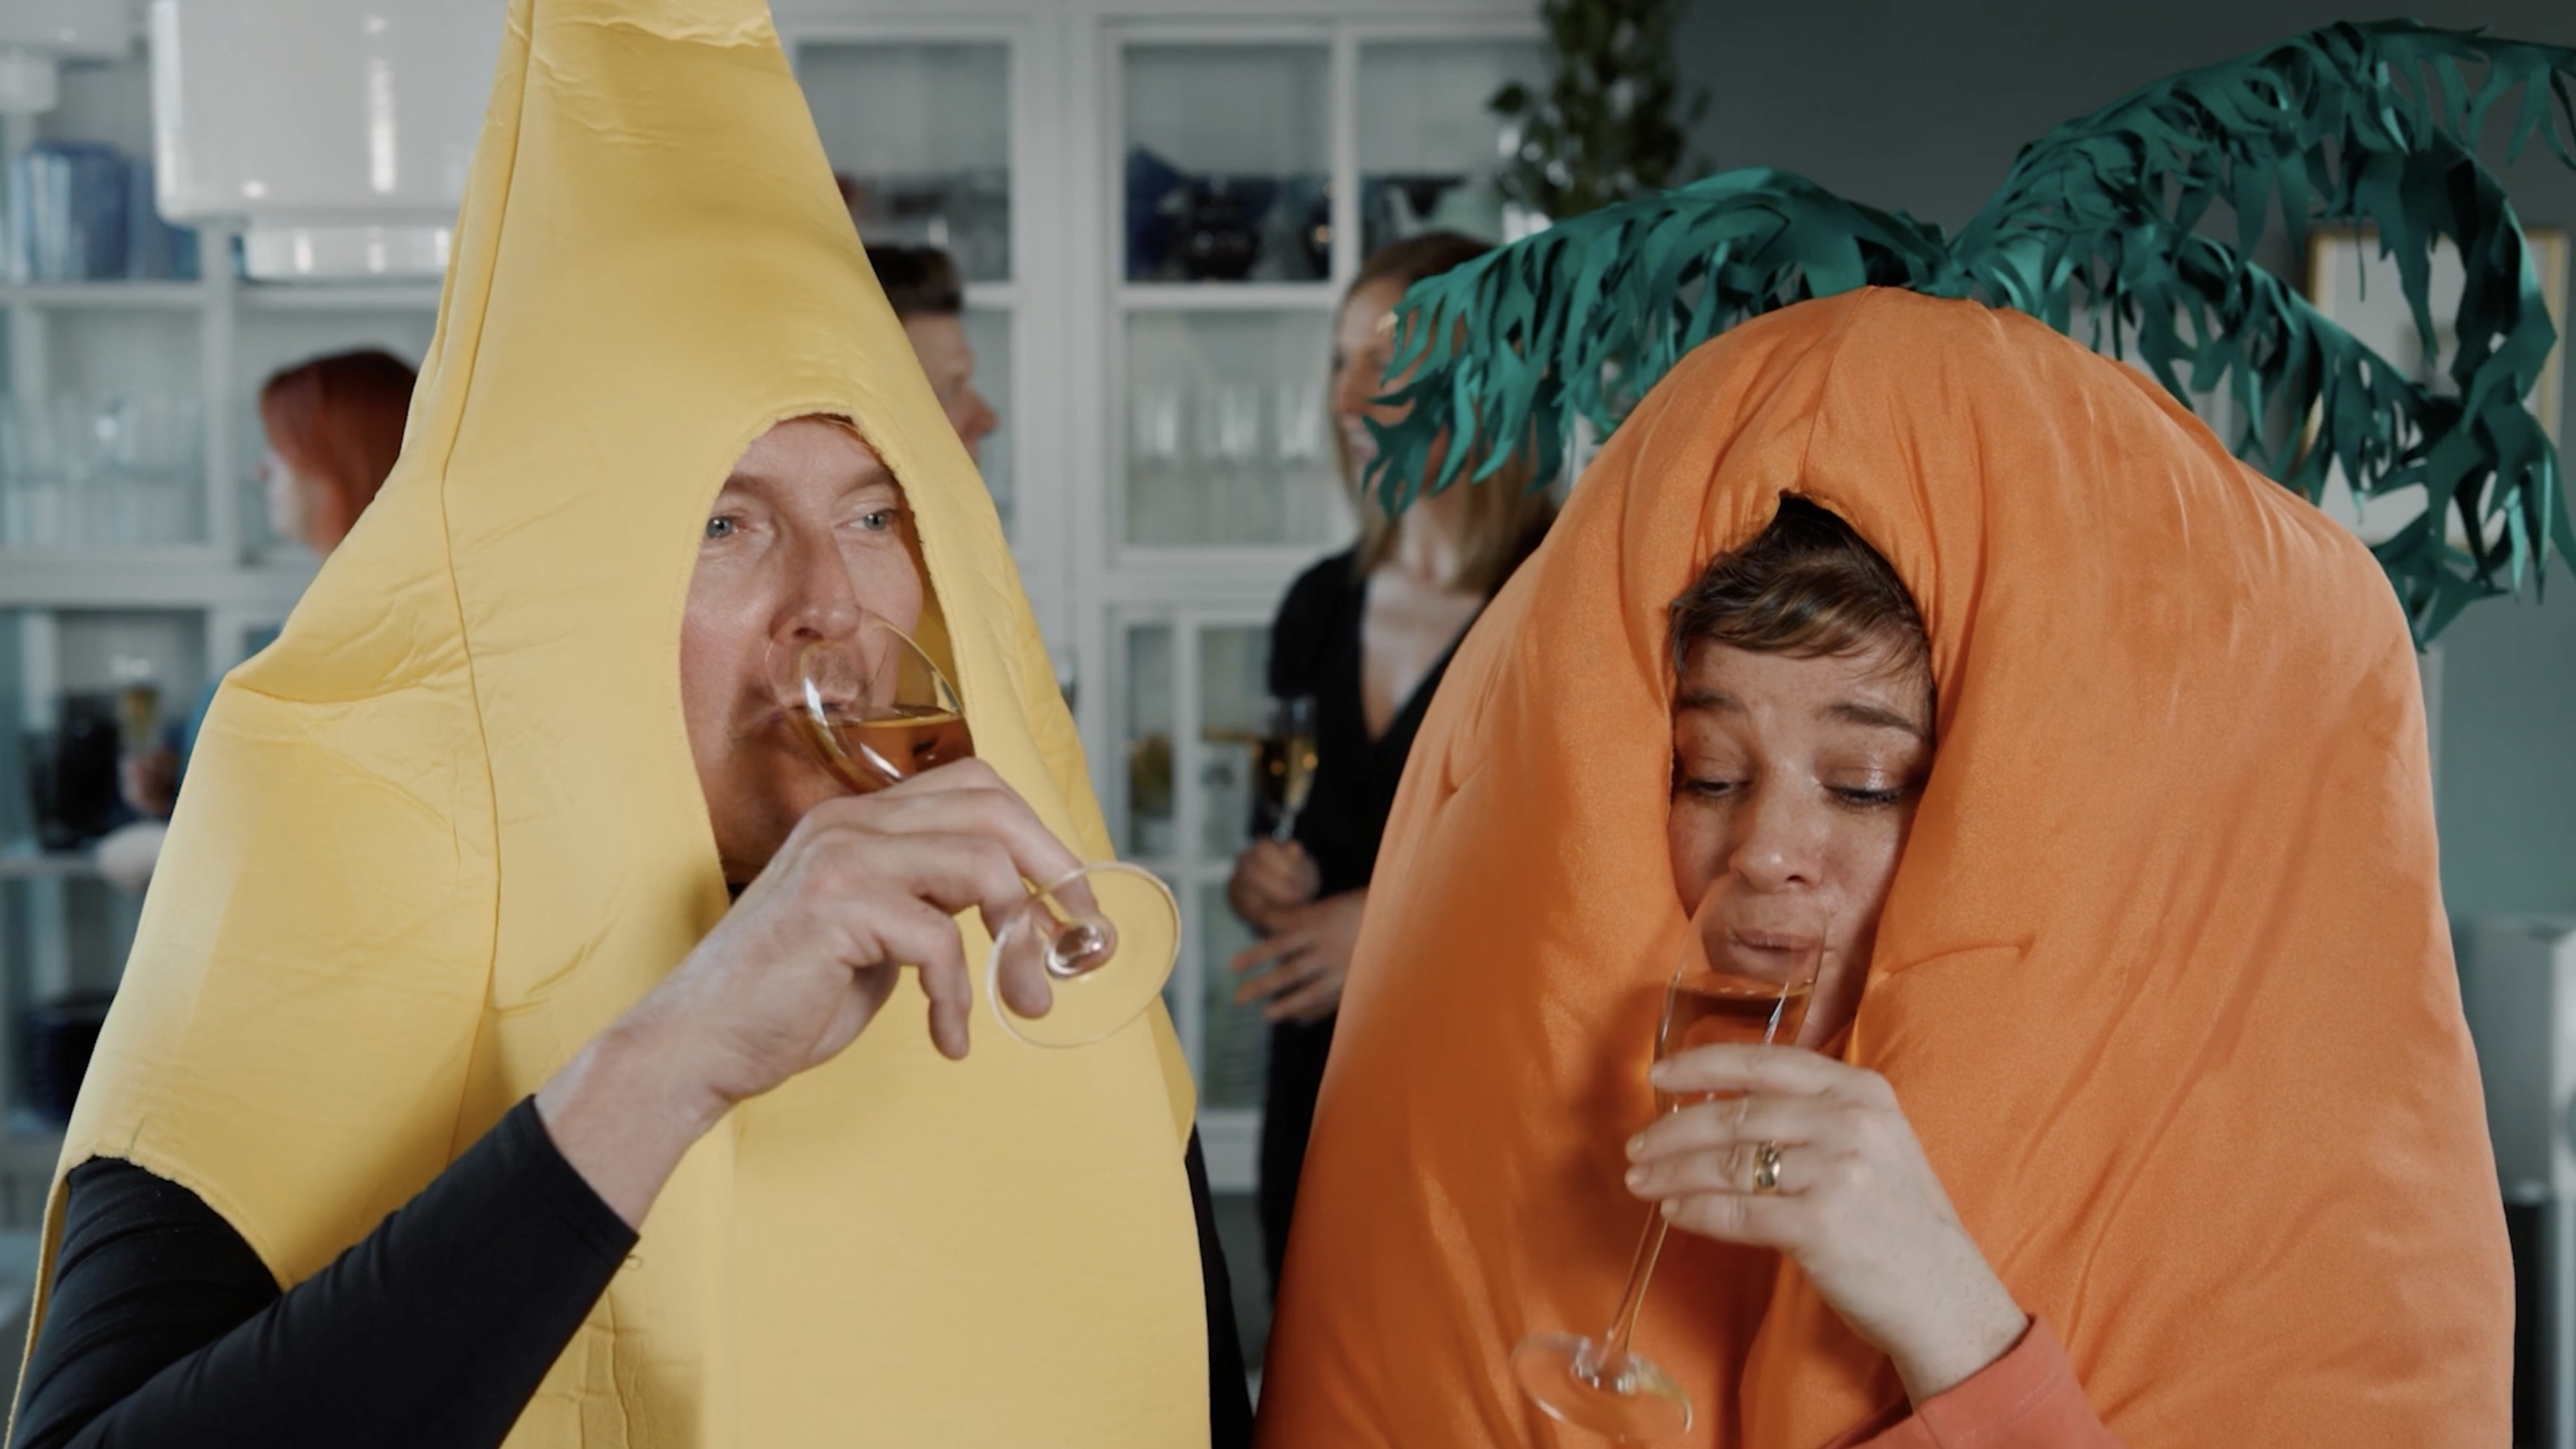 two people dressed as banana and carrot drinking sparkling wine